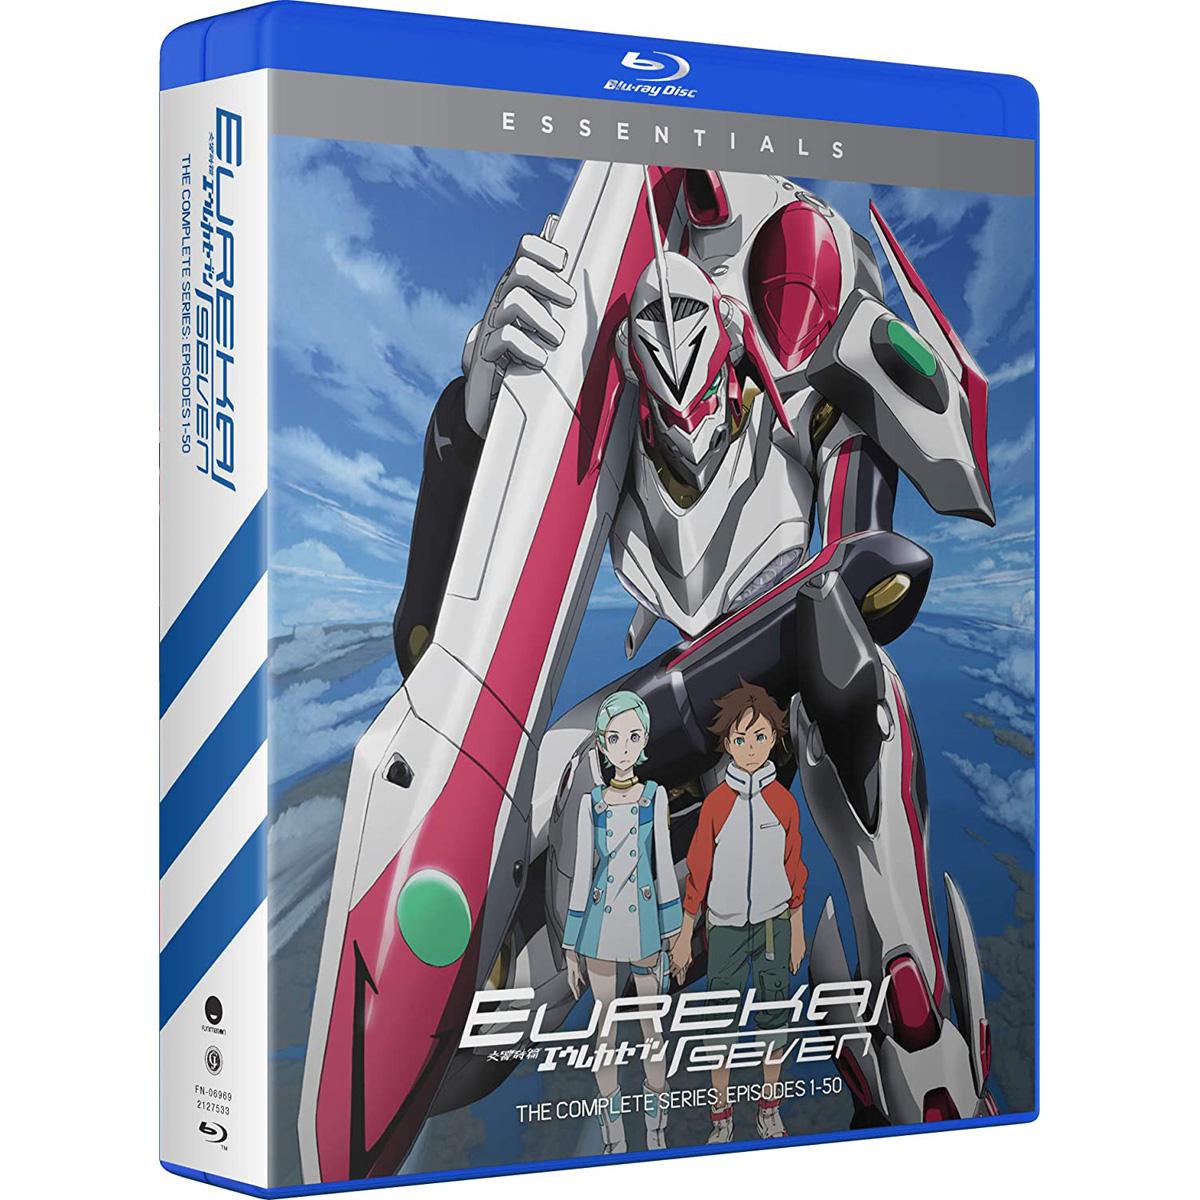 Eureka Seven Complete Series Blu-ray for $24.99